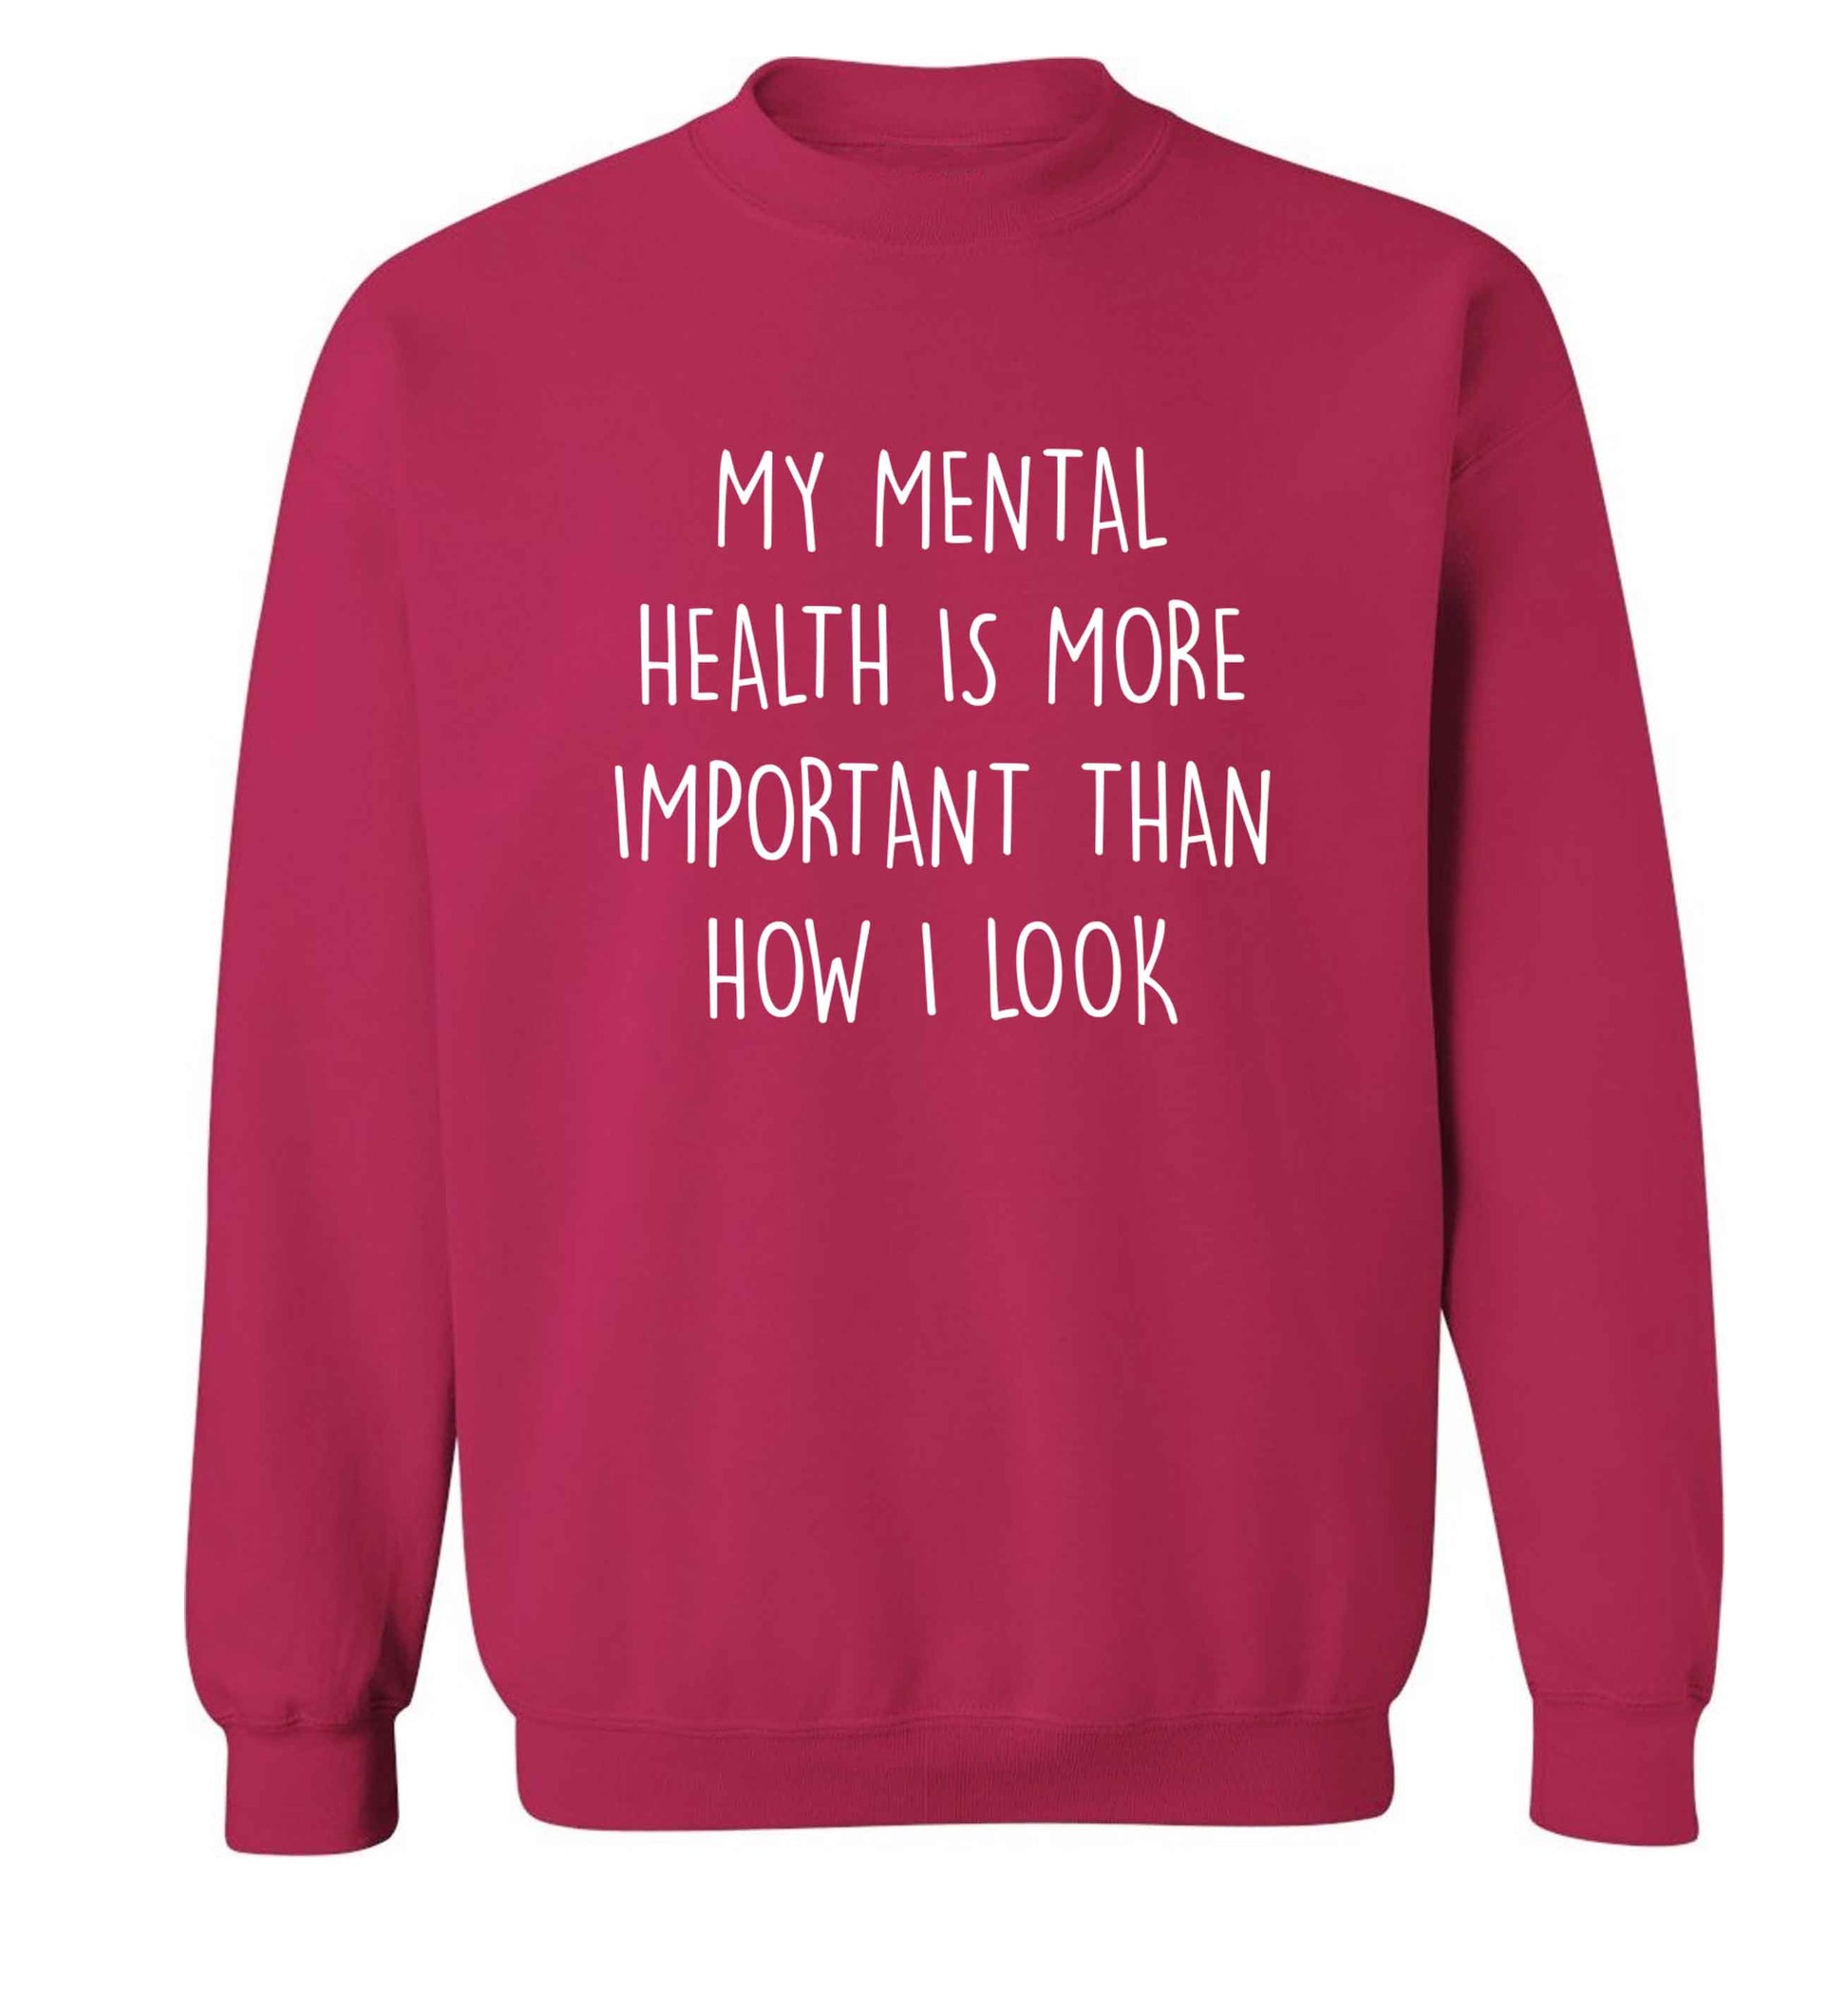 My mental health is more importnat than how I look adult's unisex pink sweater 2XL